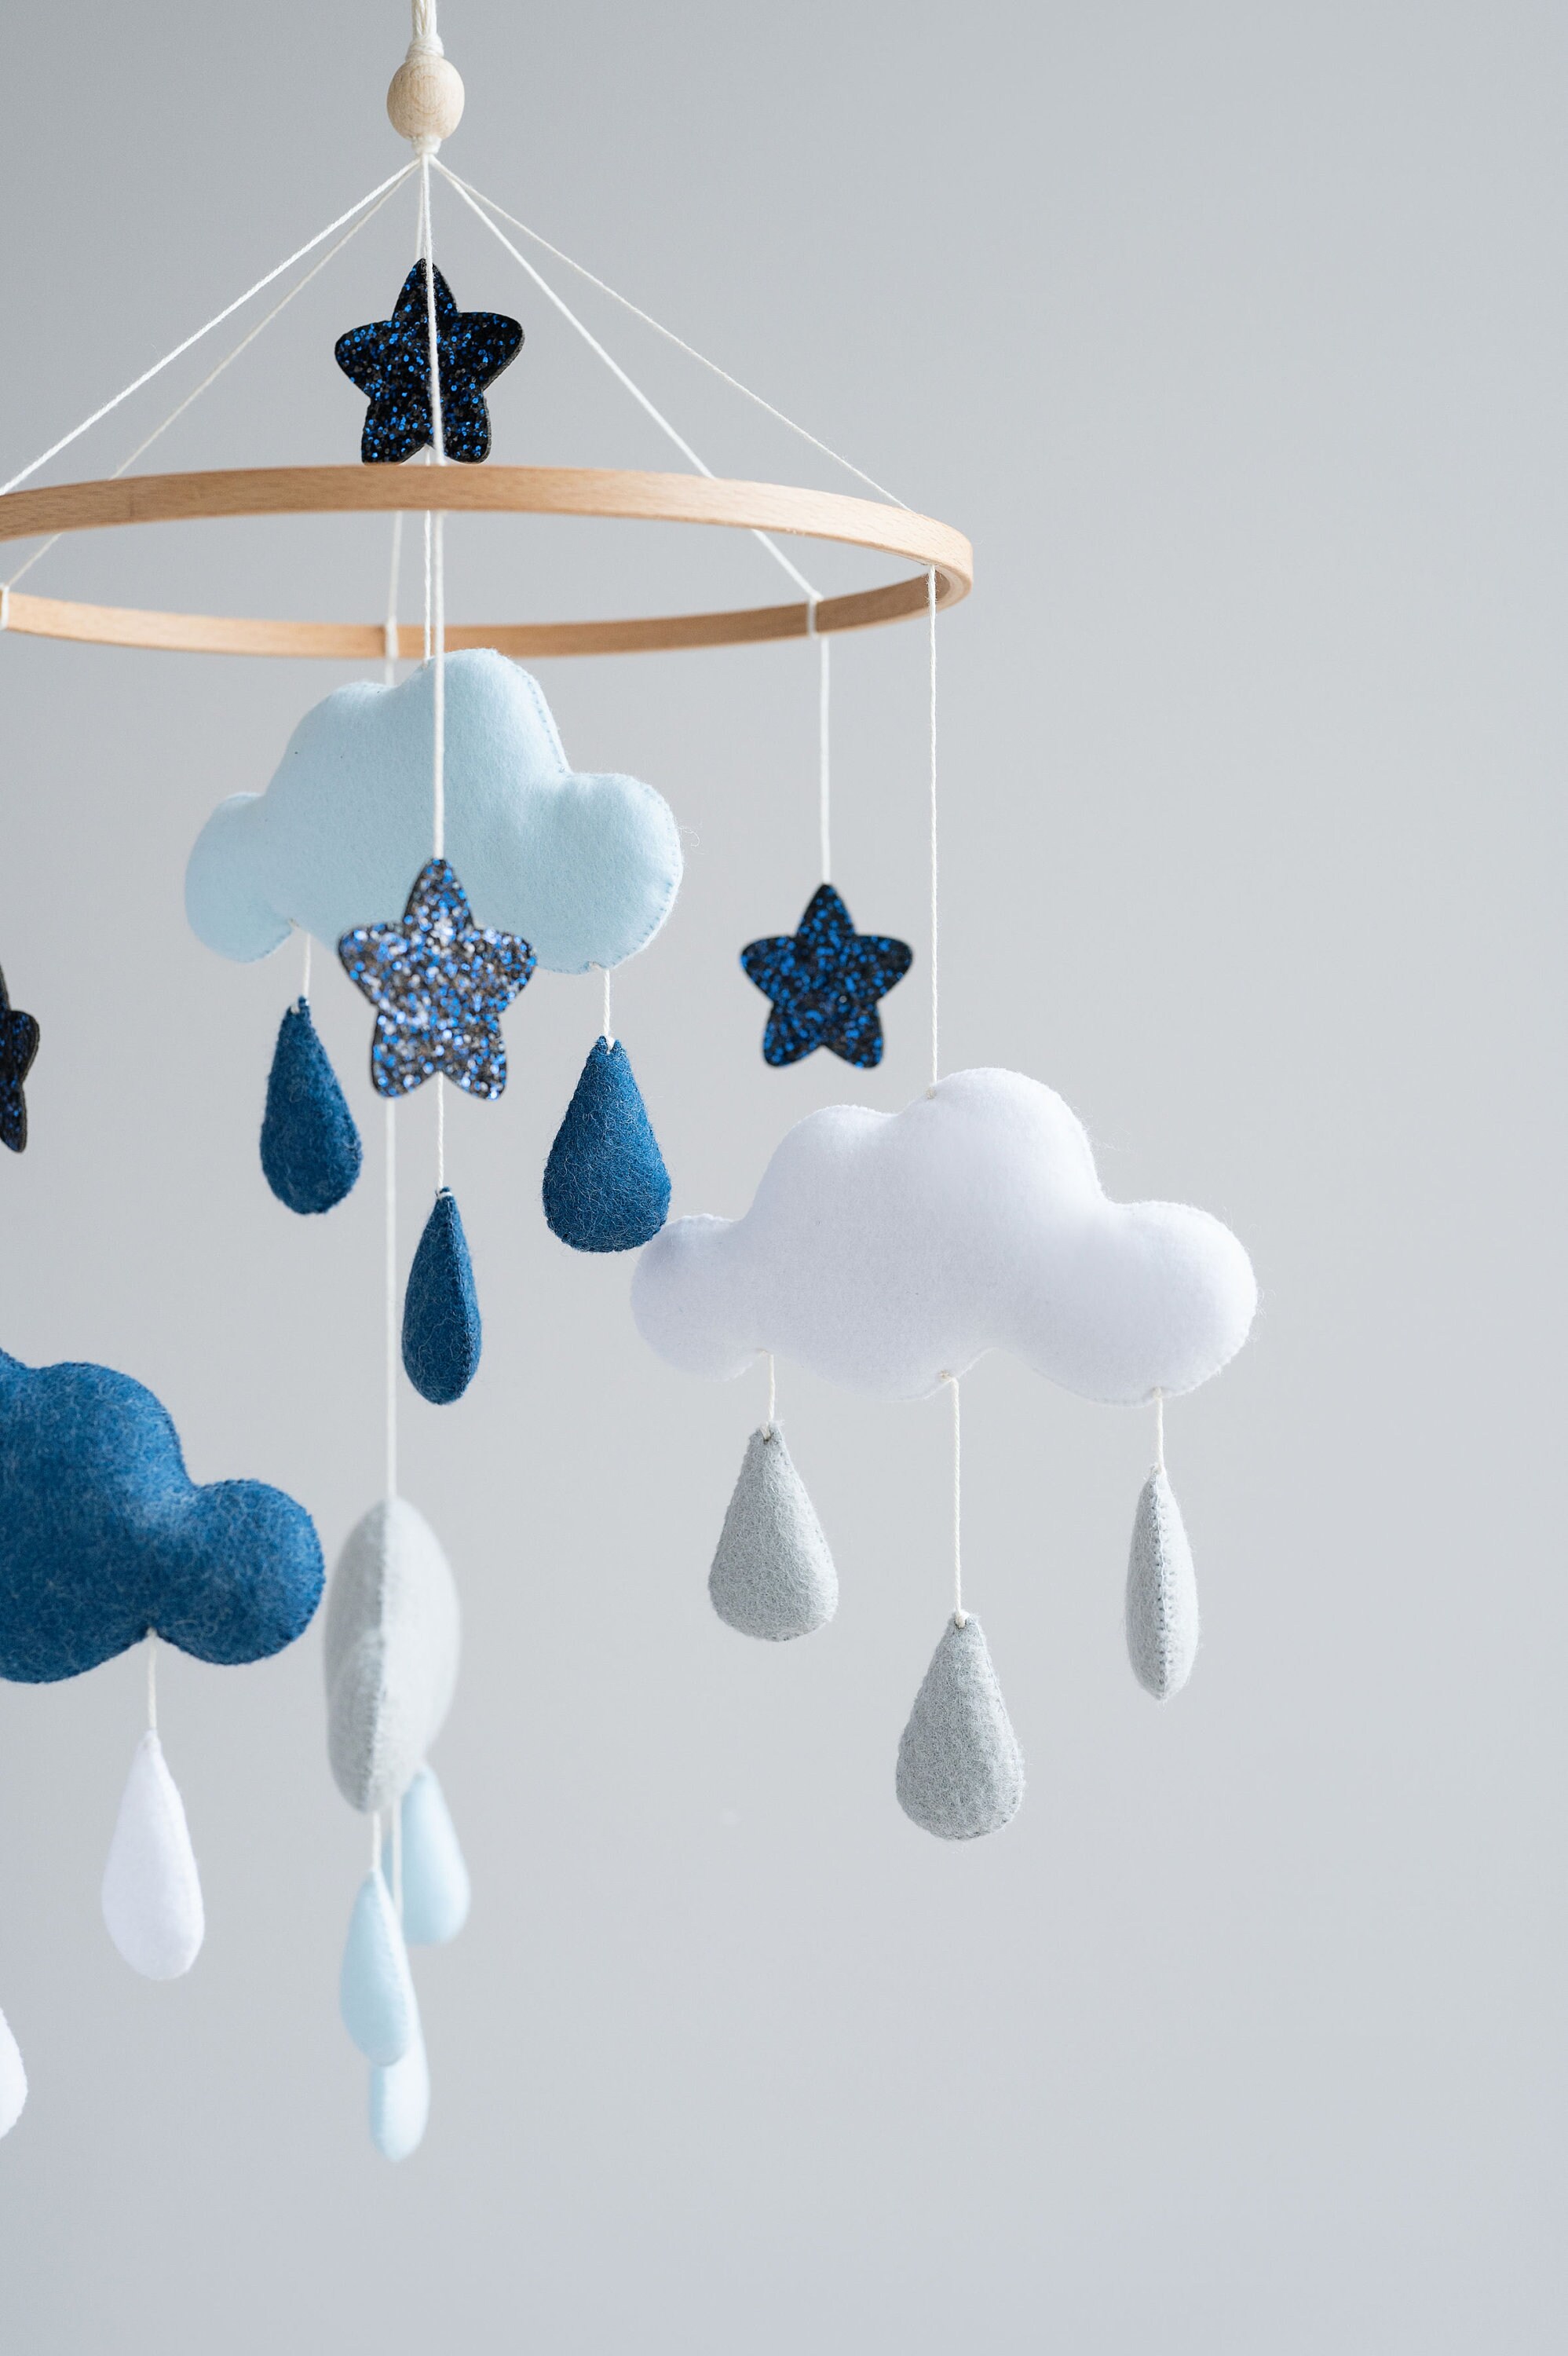 Cloud mobile baby mobile boy hanging clouds star crib | Etsy